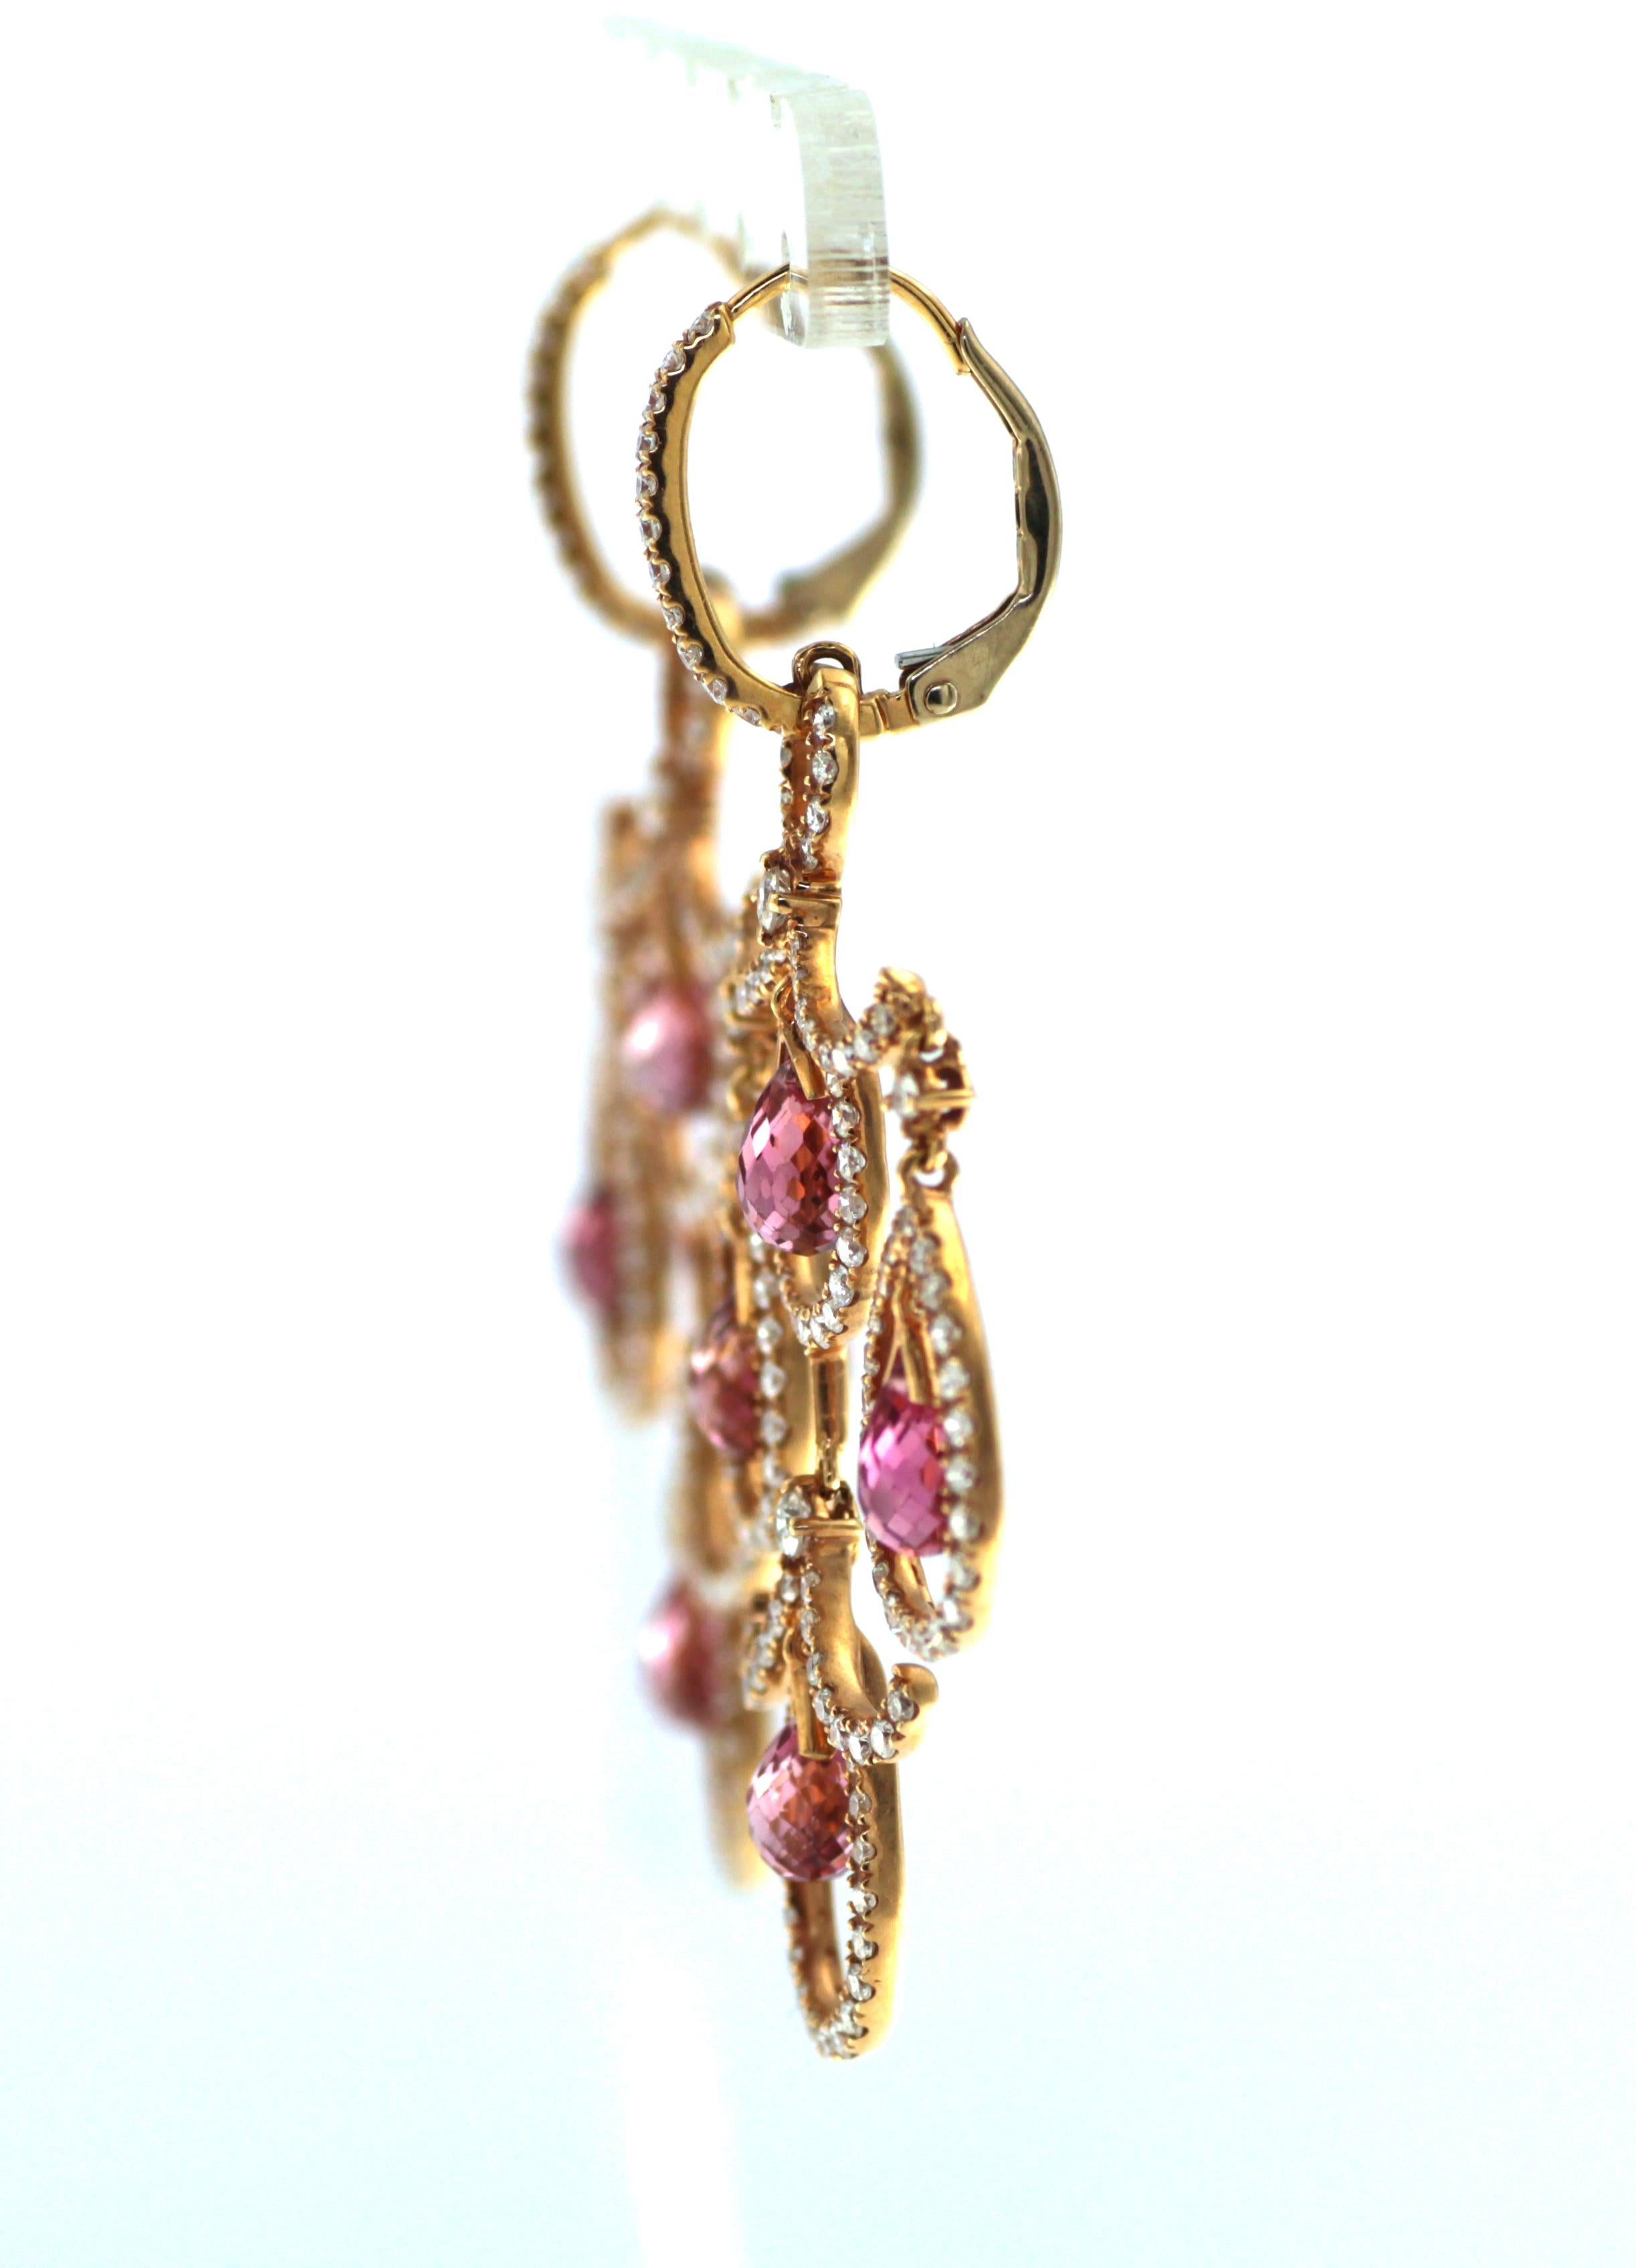 Introducing our Art Deco-inspired 18 karat rose gold earrings, a stunning statement piece that is sure to capture attention. These earrings feature a breathtaking 7.35 carat rubellite briolette that hangs elegantly from the ear, accentuated by a